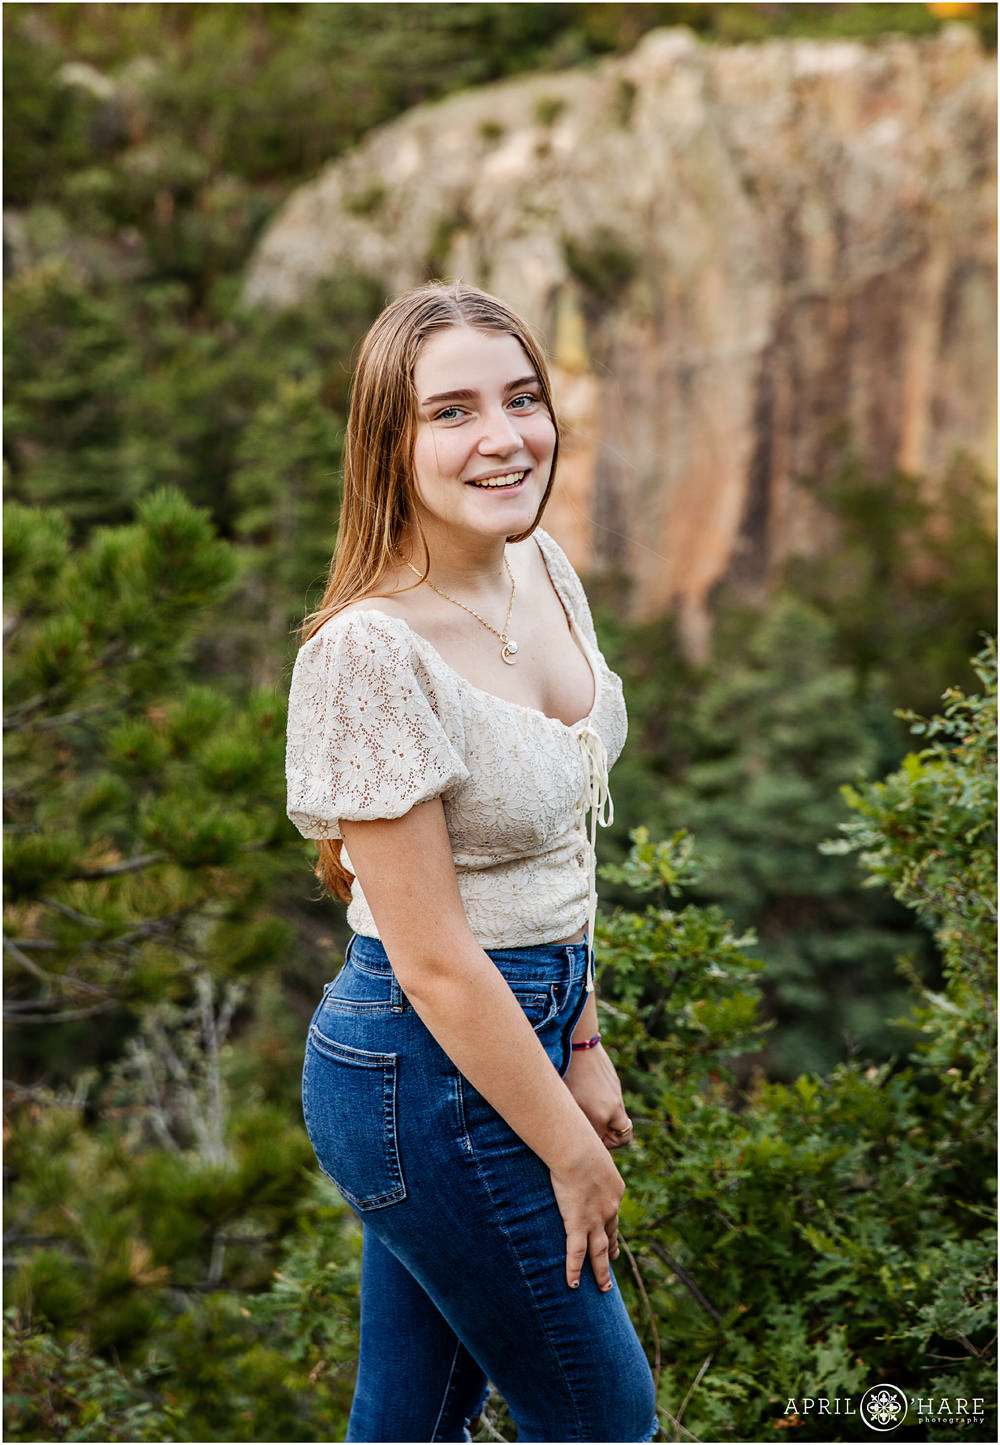 Teen girl with long blonde hair wearing a cream top and jeans poses in front of a pretty backdrop at Lovers Leap in Colorado